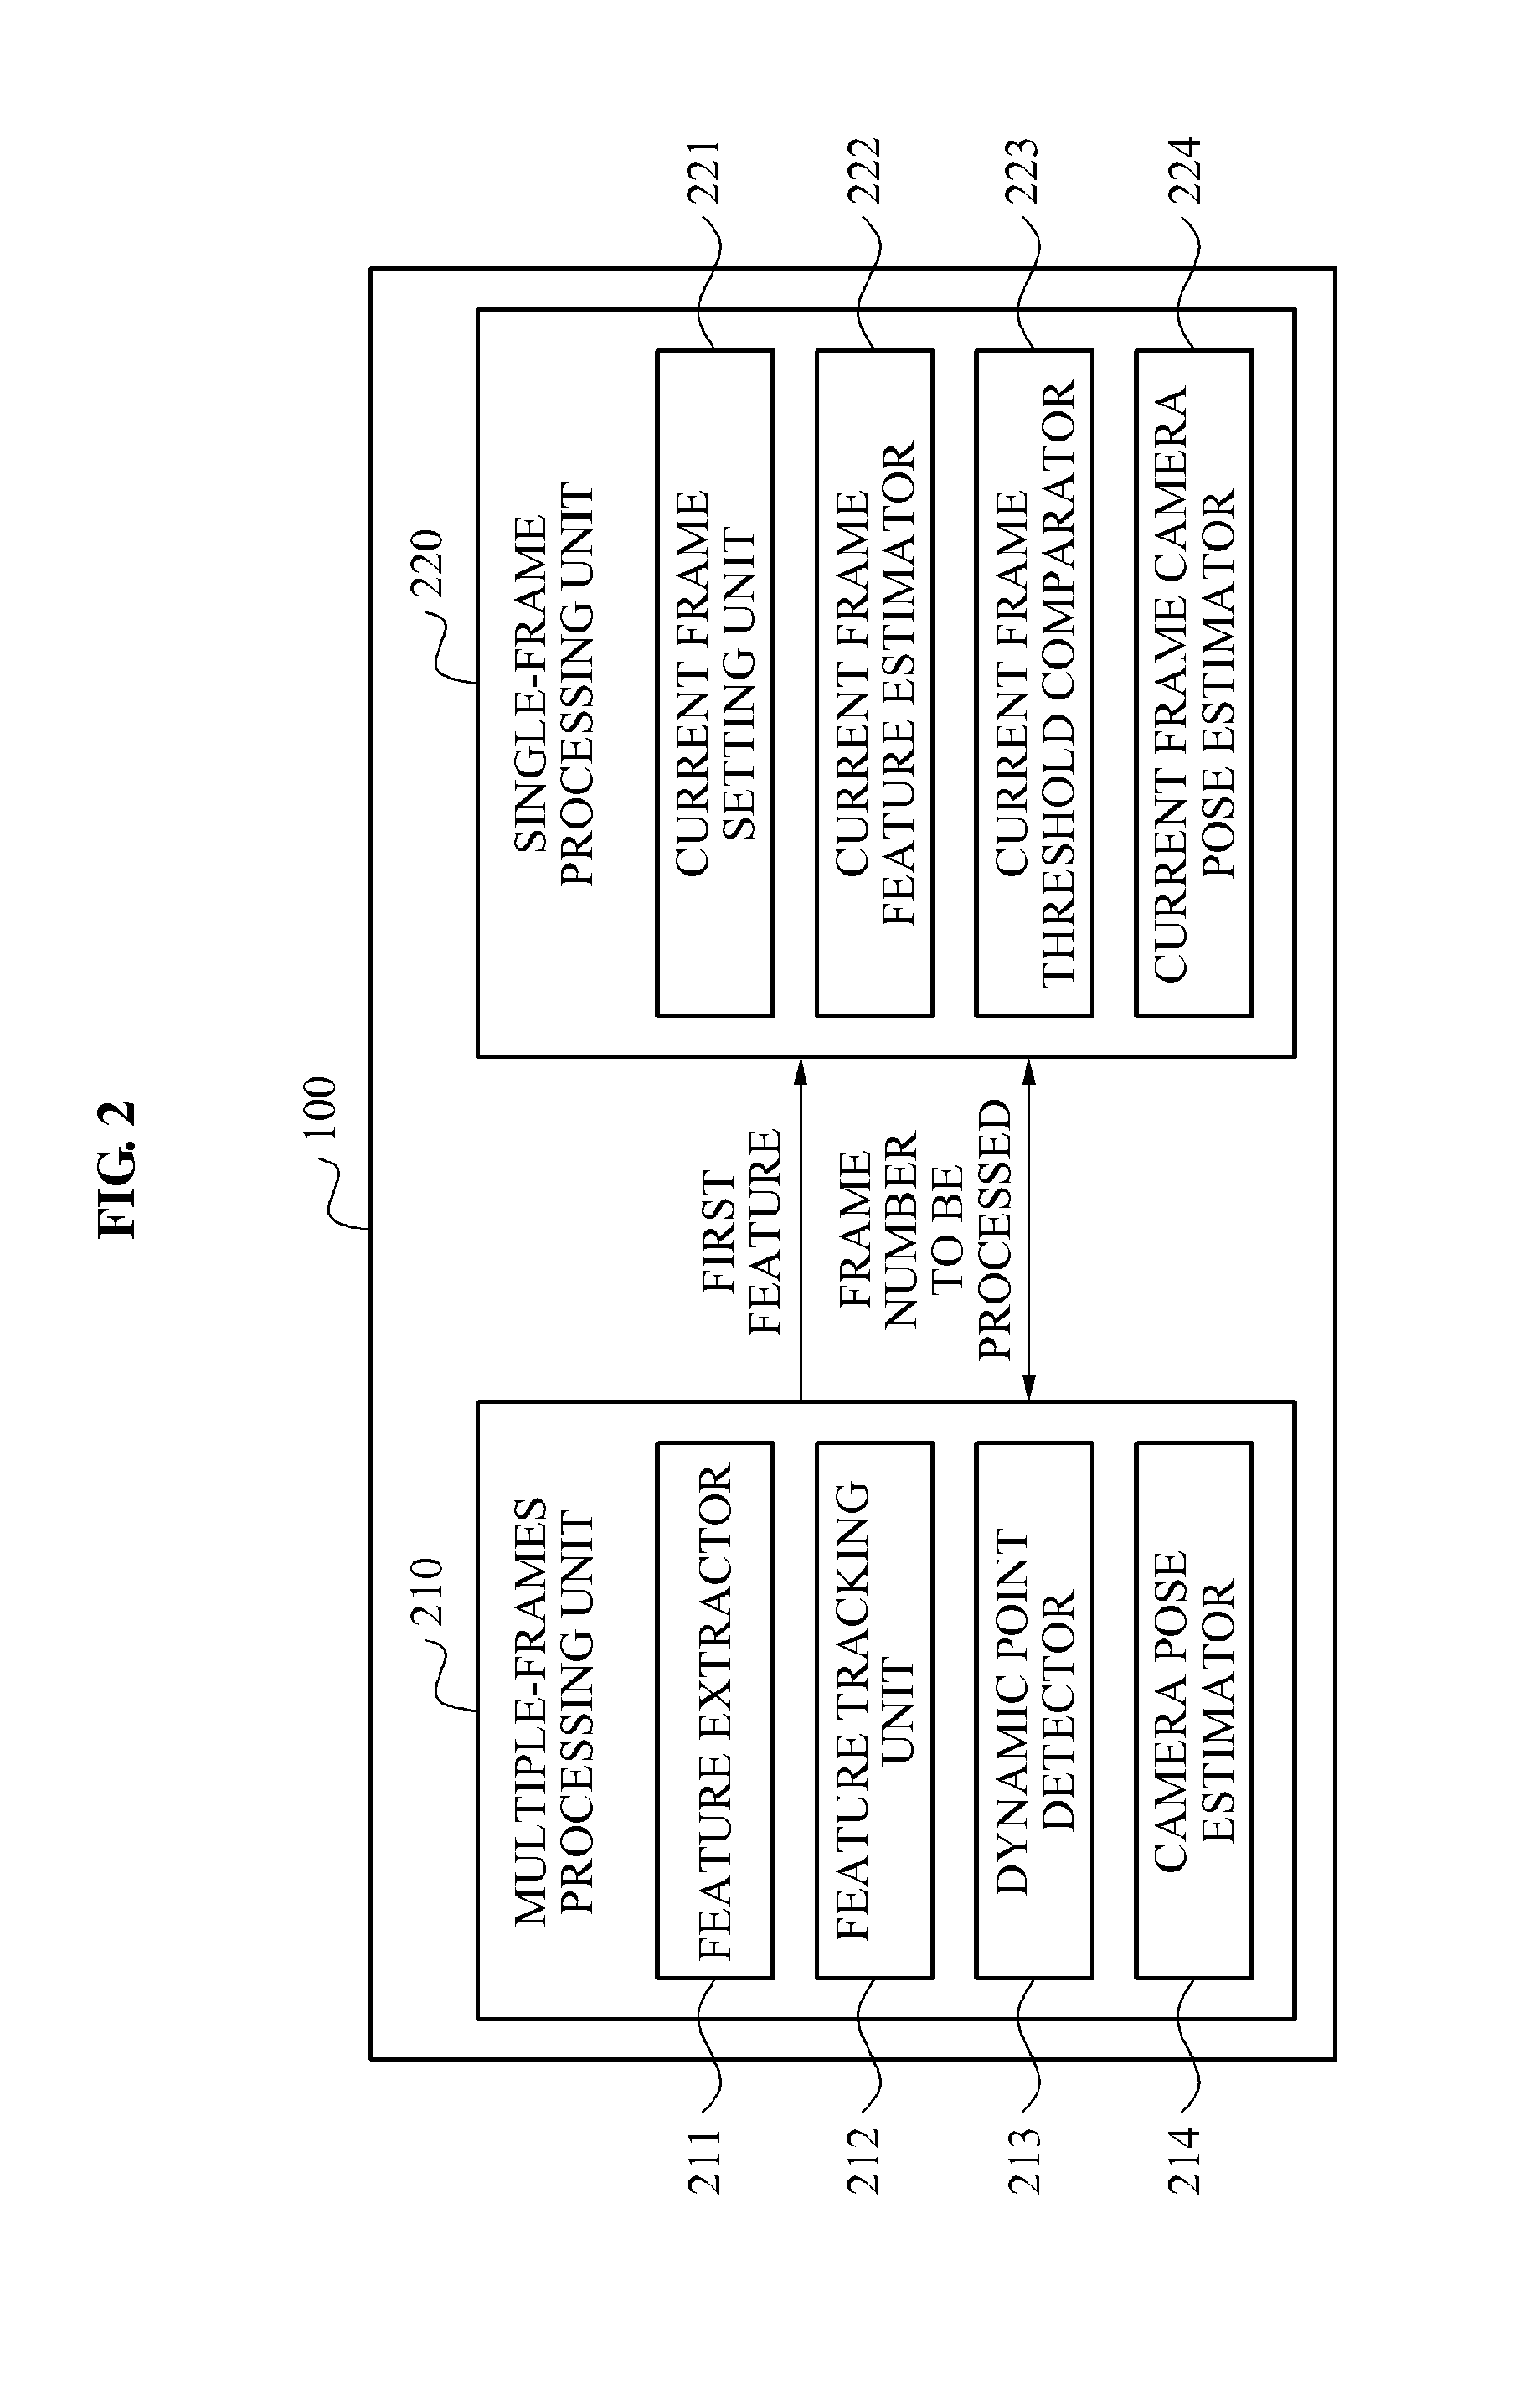 Method and apparatus for camera tracking